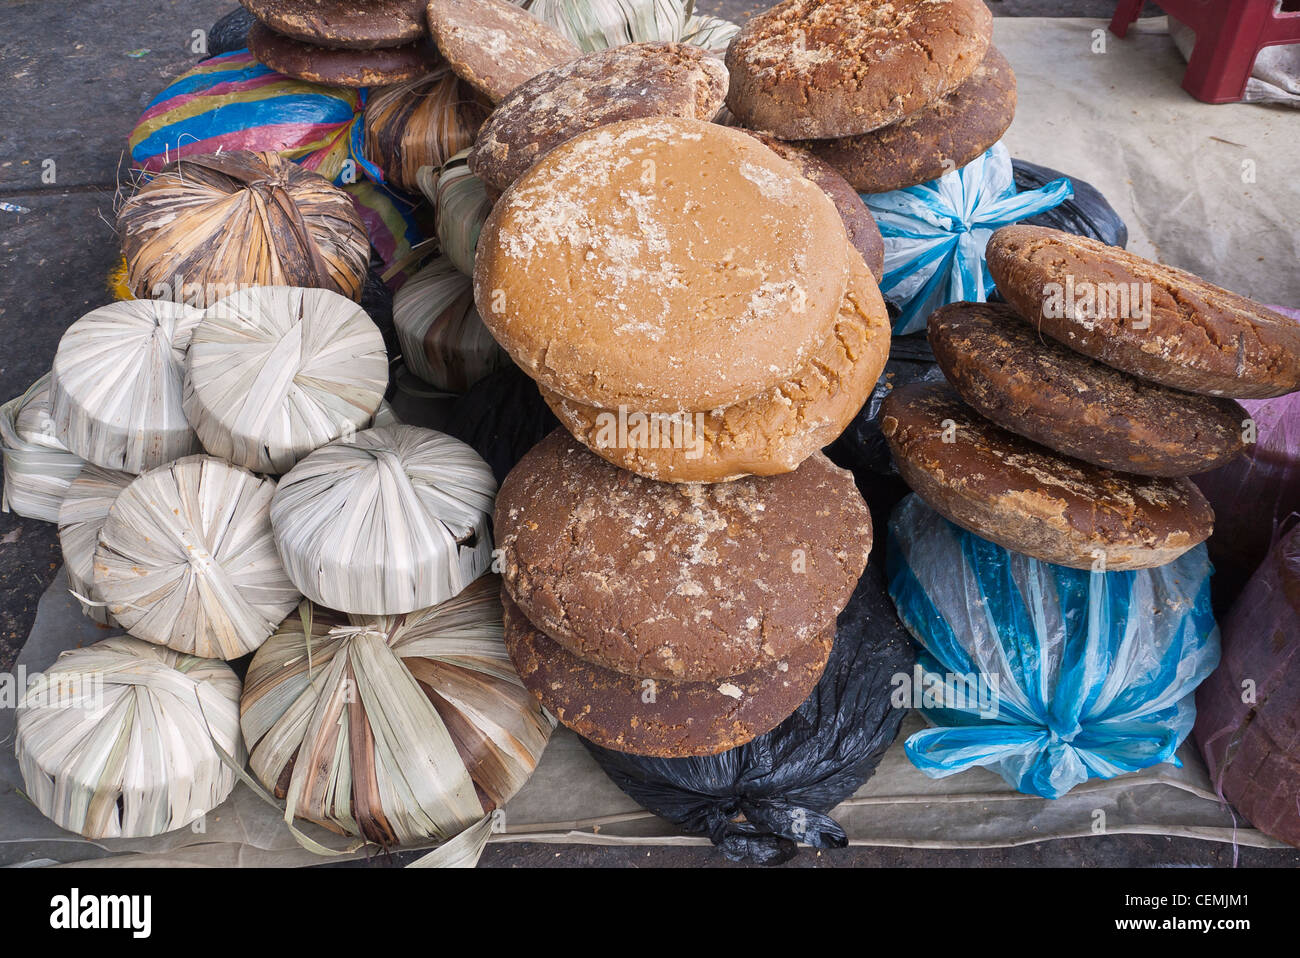 Molded brown sugar, panela, on display for sale at the market in Pujili, Ecuador. Stock Photo